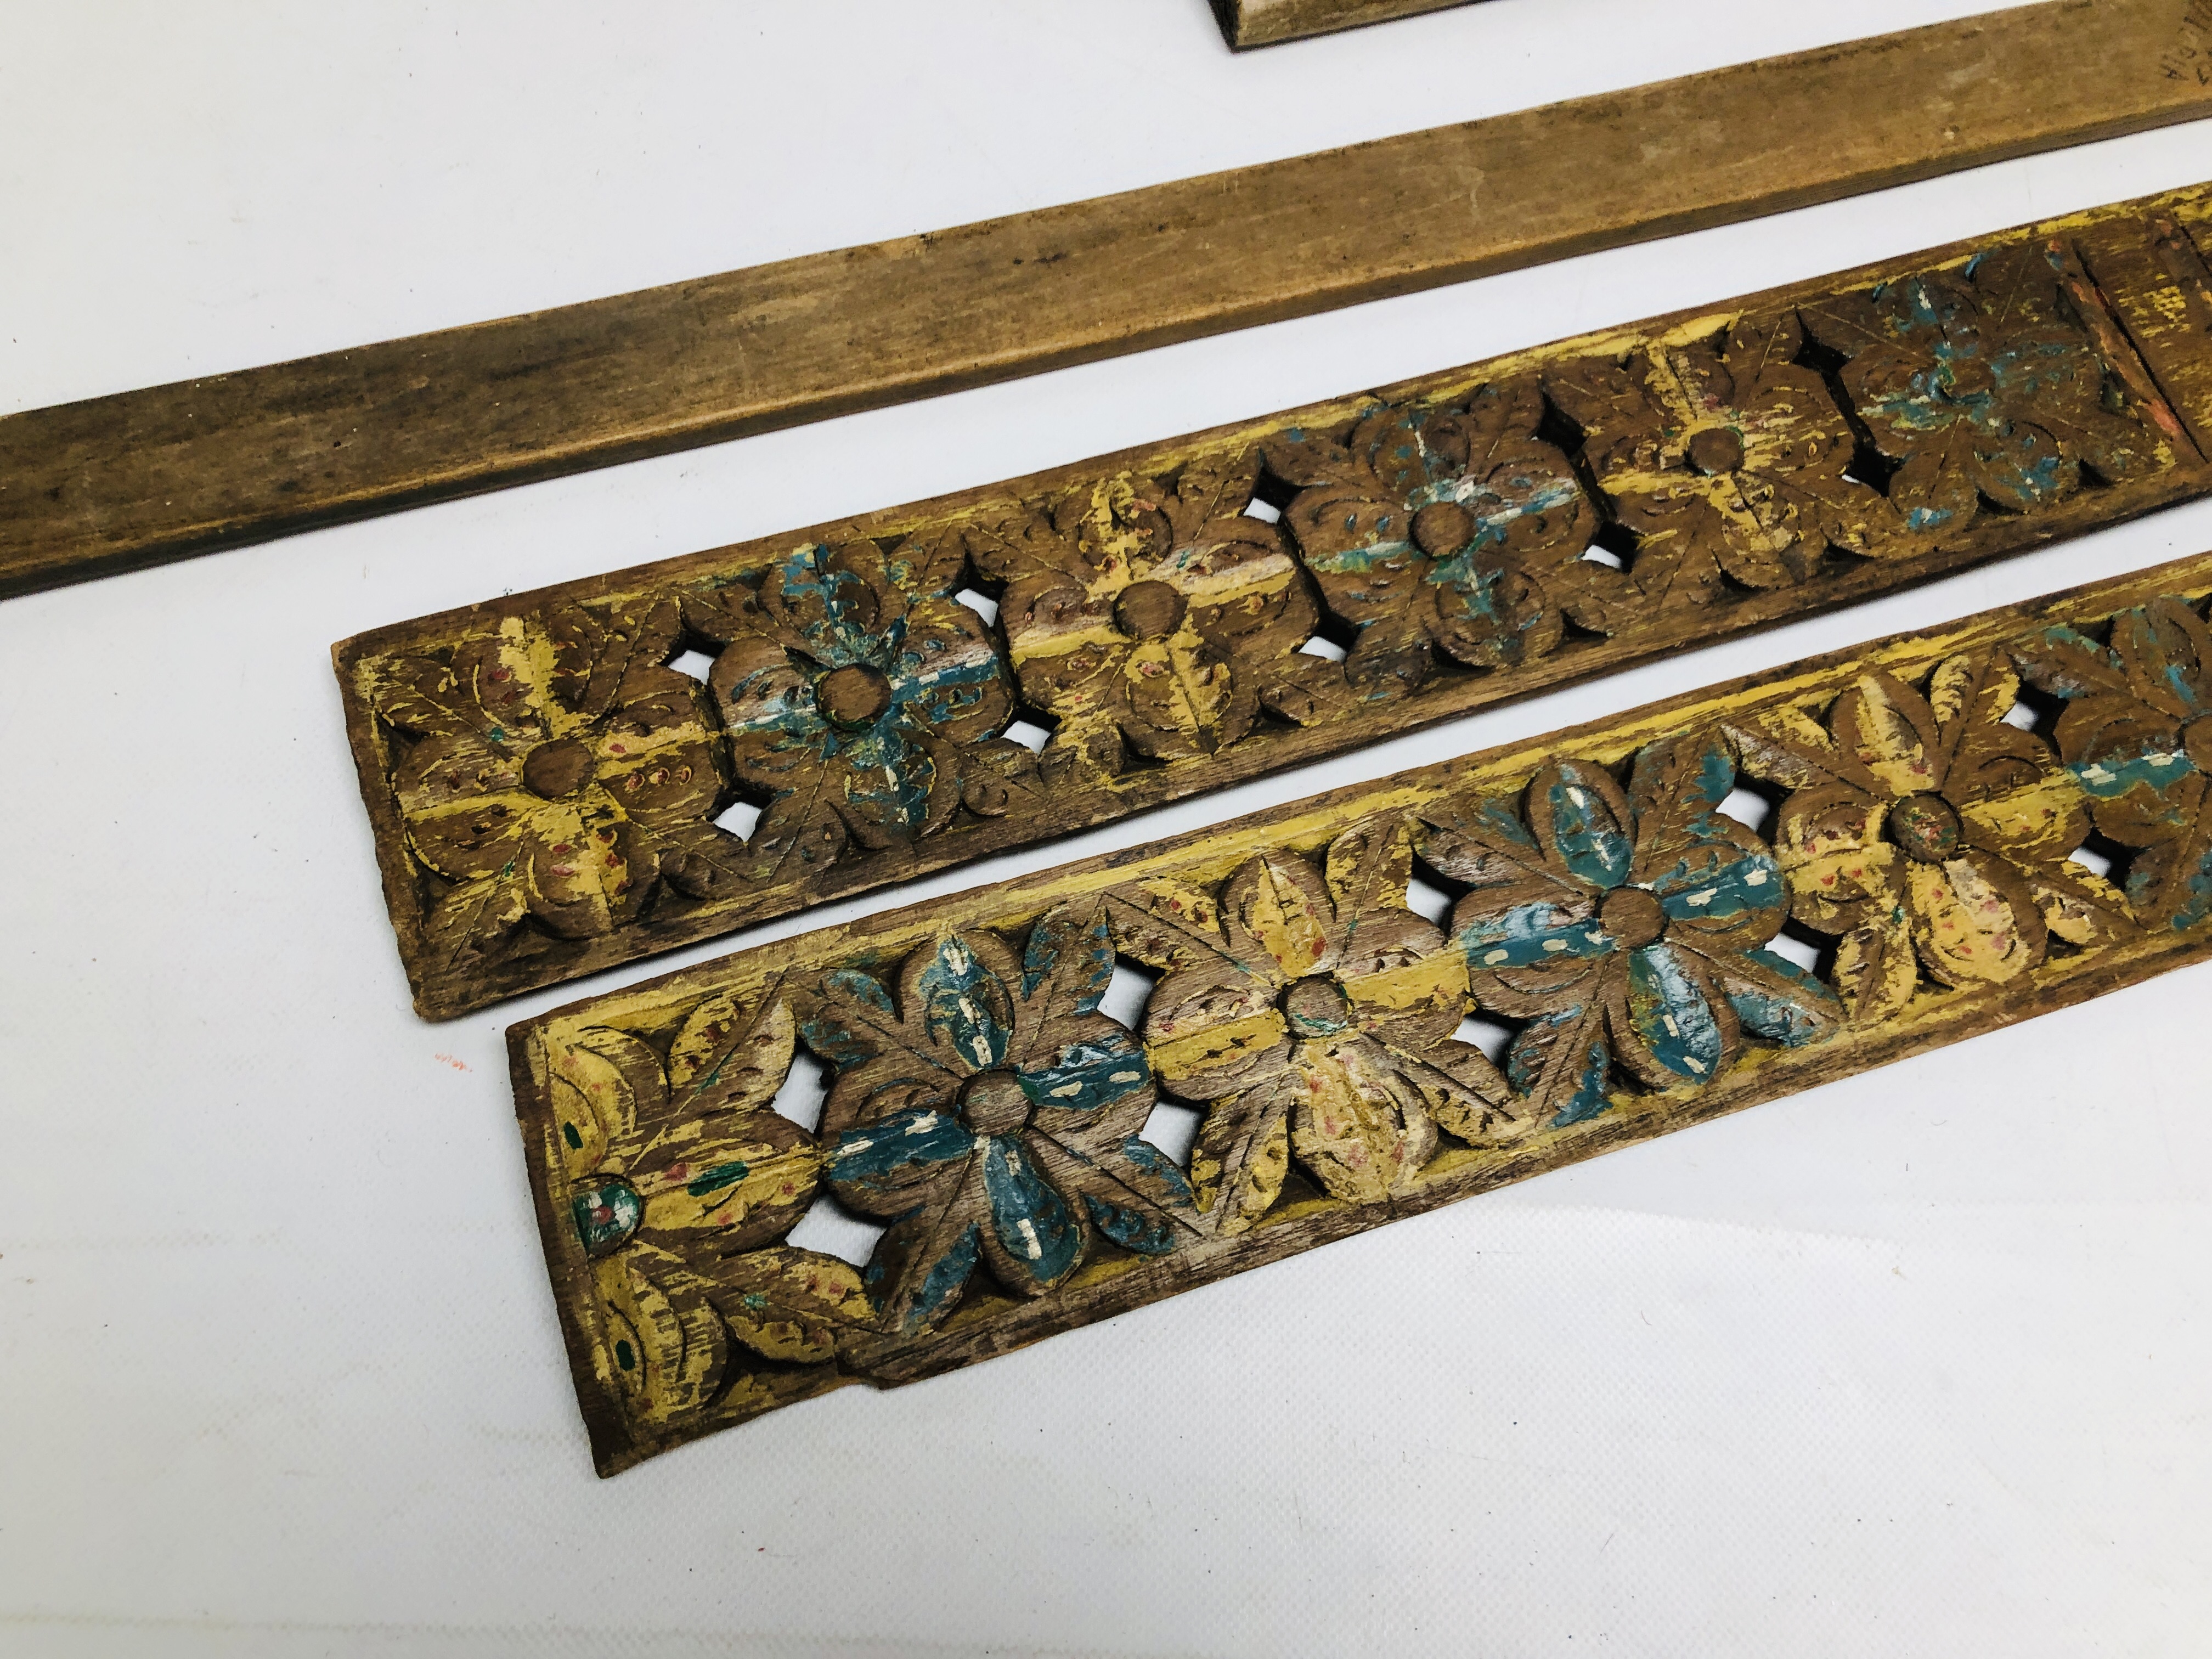 A PAIR OF CARVED HARDWOOD PIERCED BOARDS, WITH PAINTED FLOWERS AND LEAVES HEIGHT 88.5CM. - Image 2 of 10